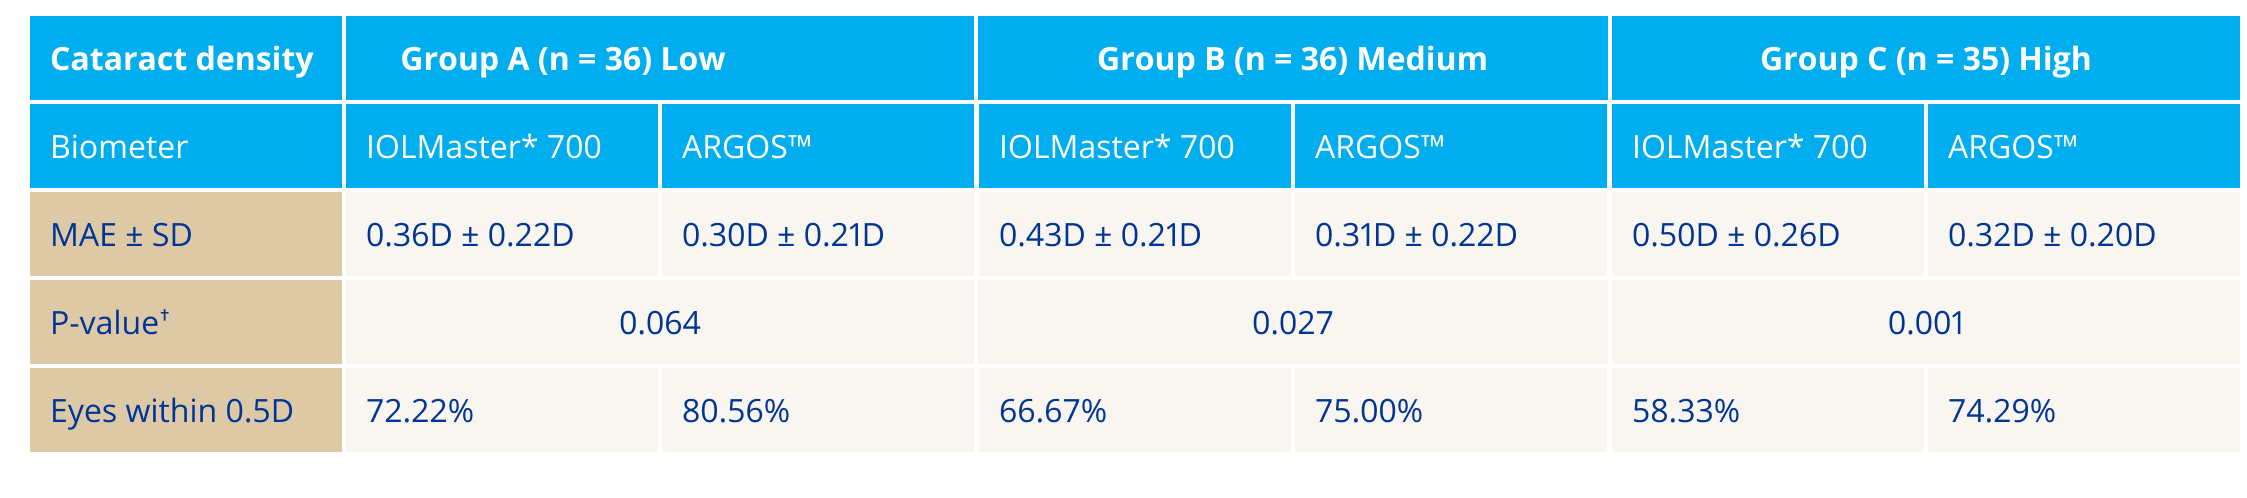 A table comparing the refractive outcomes in patients with nuclear cataracts between the ARGOS Biometer and IOLMaster 700. In low density eyes, the mean absolute error was not statistically different between the ARGOS Biometer and IOLMaster 700. In medium and high density eyes, mean absolute error was significantly lower with the ARGOS Biometer compared to IOLMaster 700.